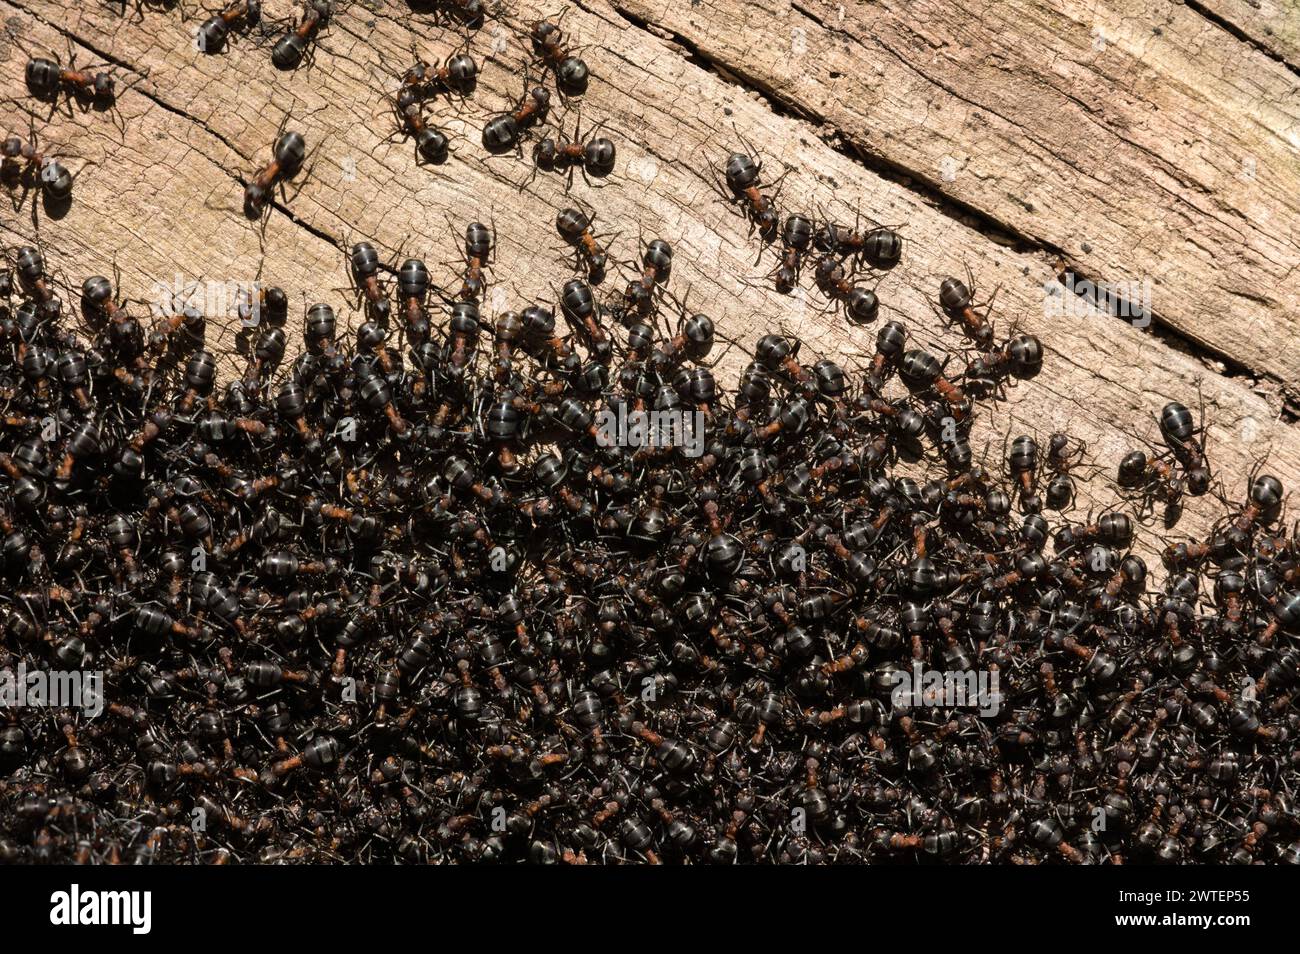 Swarming in ant colony nest. Thousands of black ants. Czech republic nature. Anthill in the forest. Stock Photo